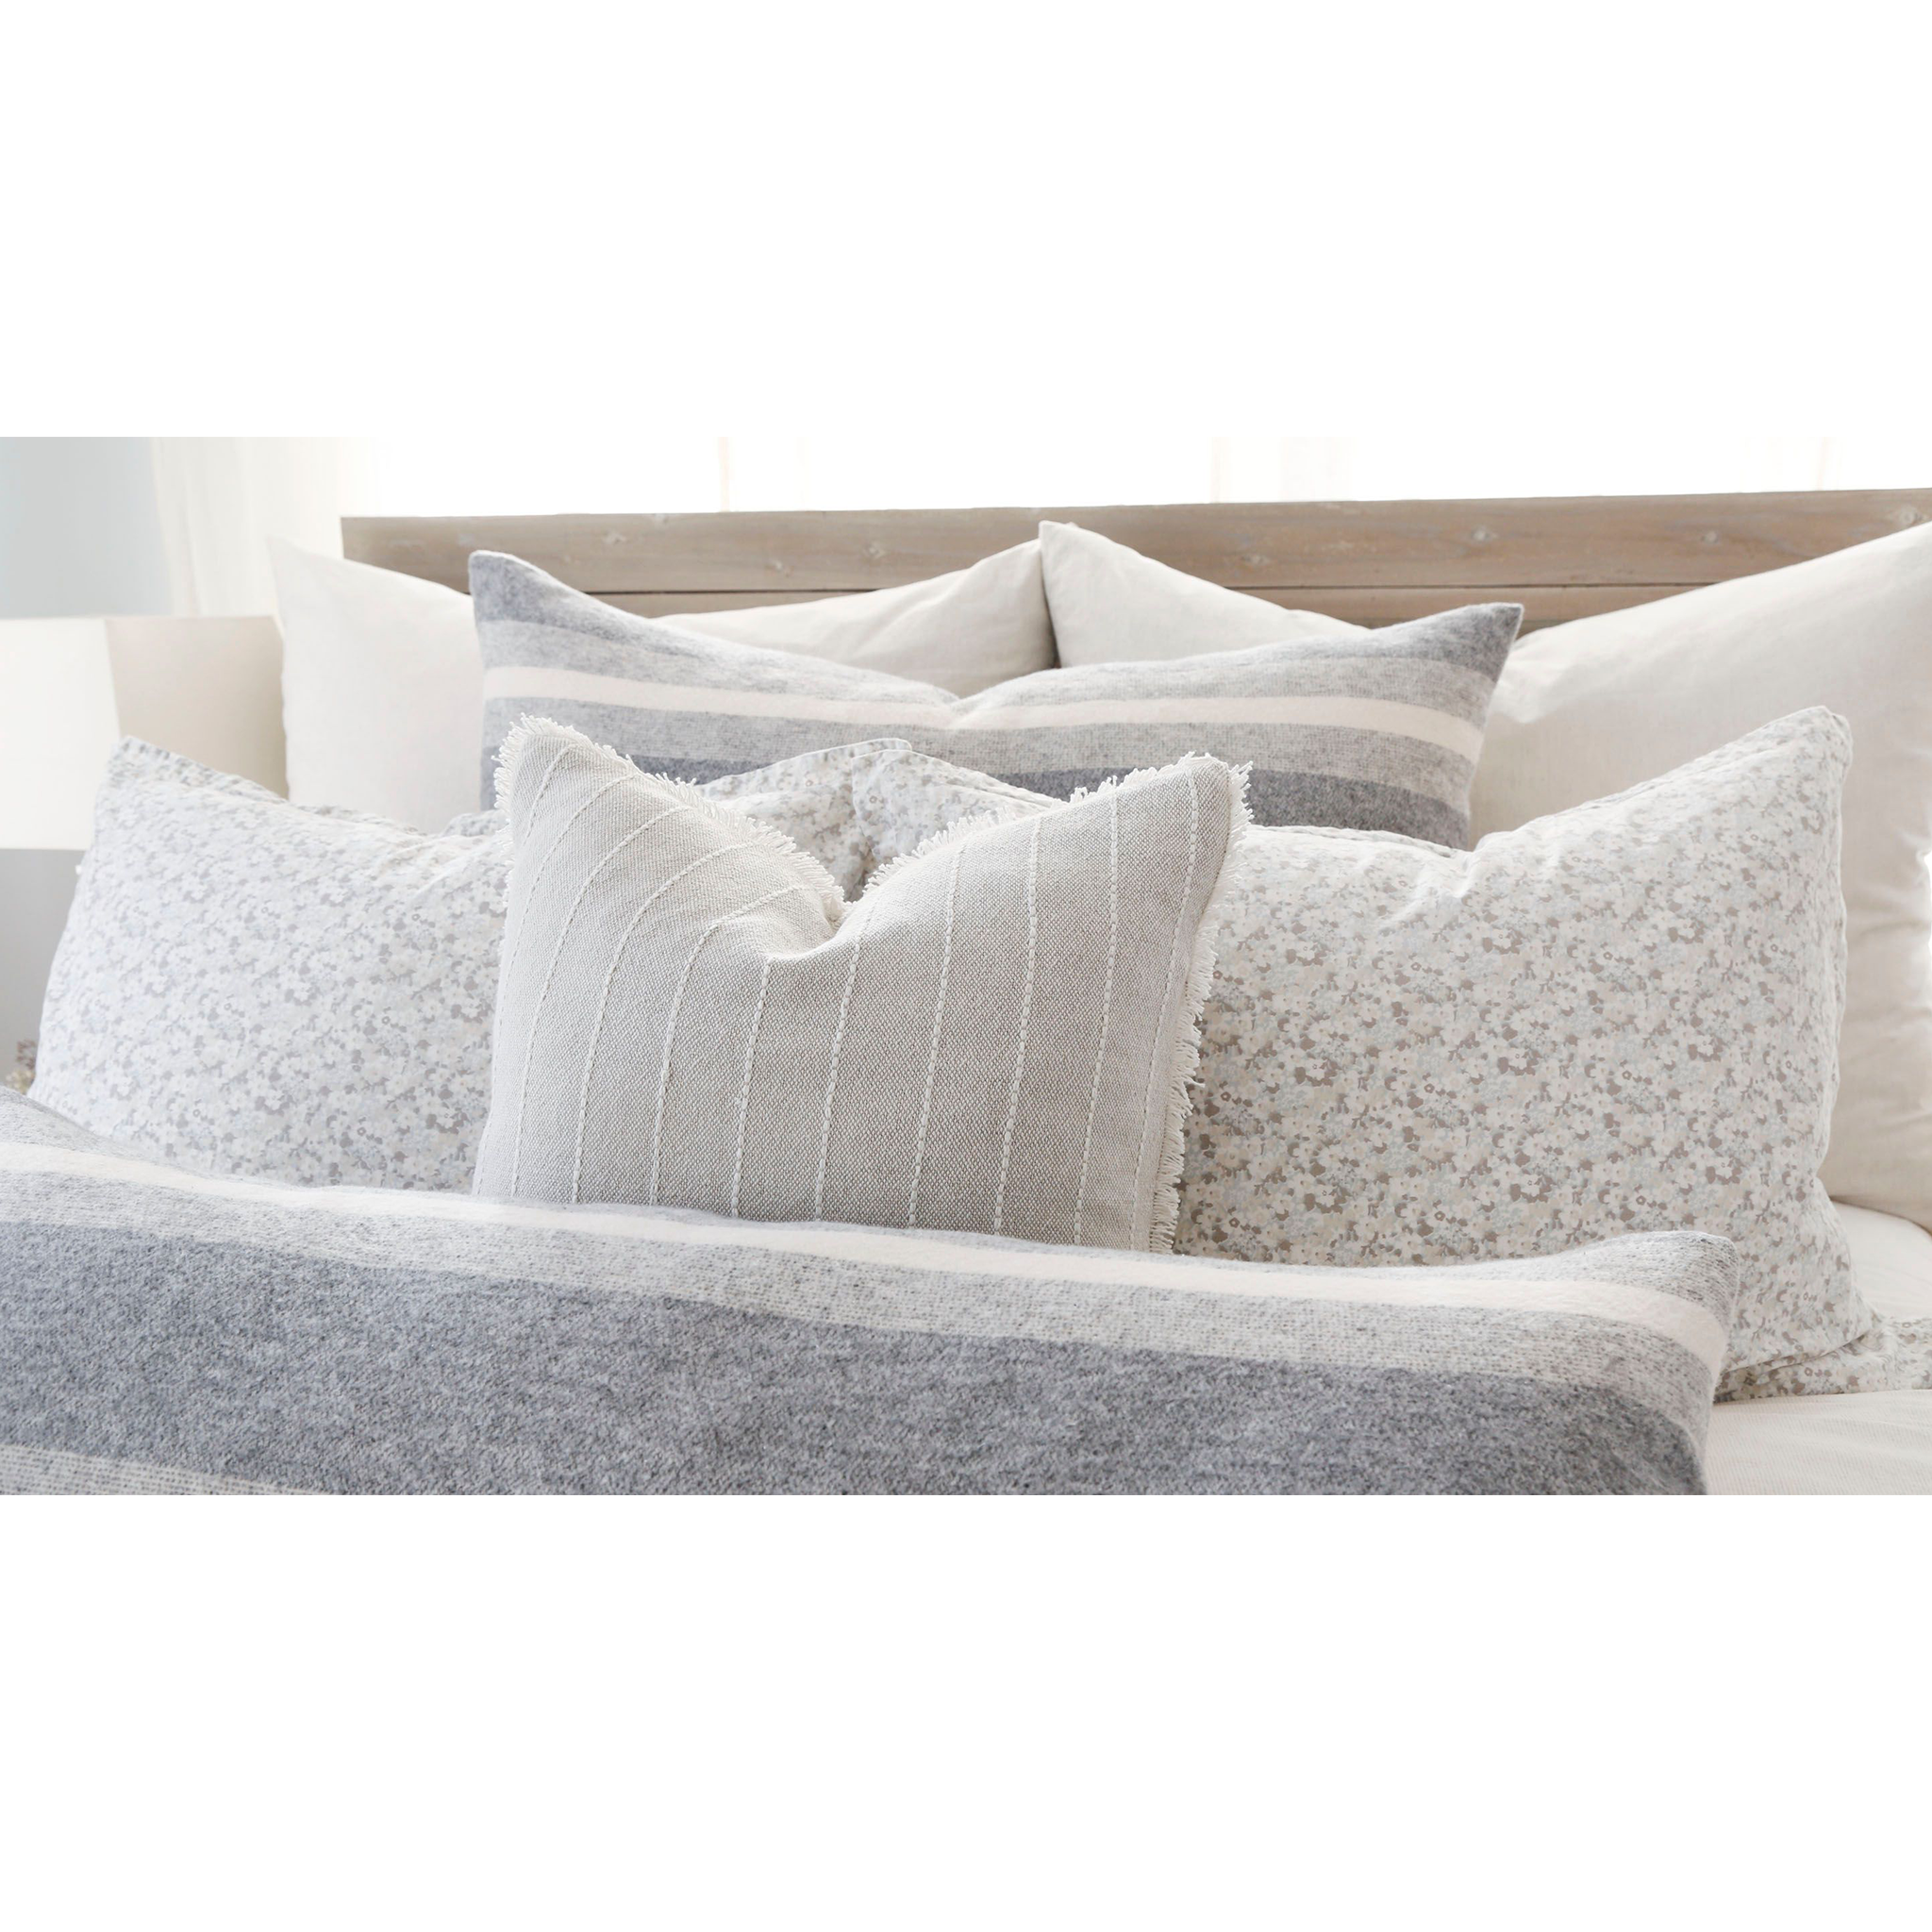 June Big Pillow With Insert – Pom Pom at Home